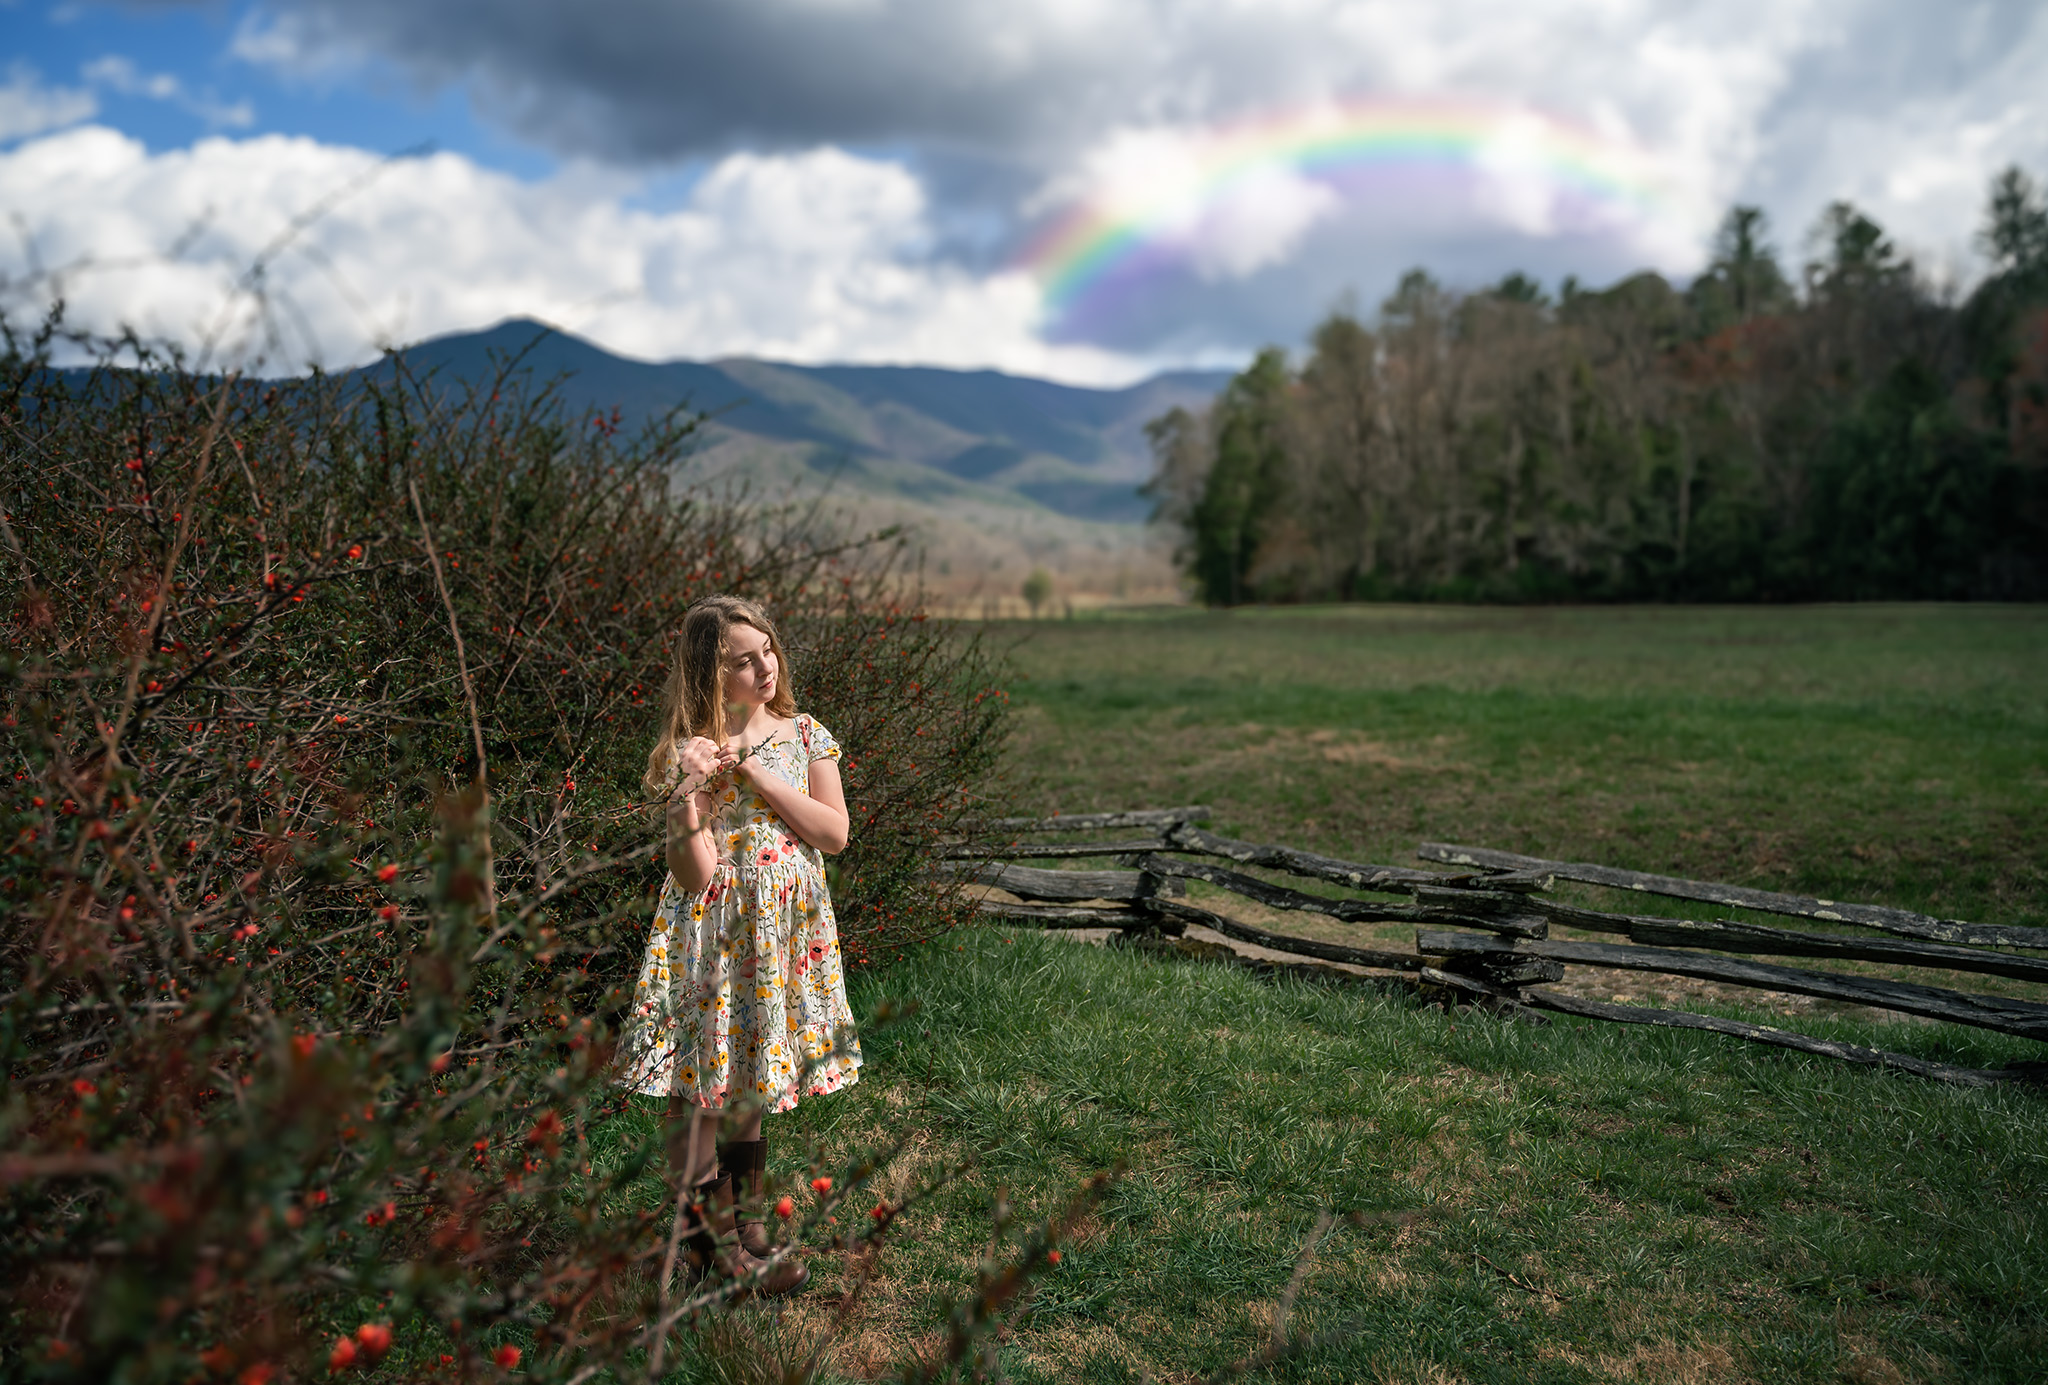 Girl standing in a field with a rainbow in the sky